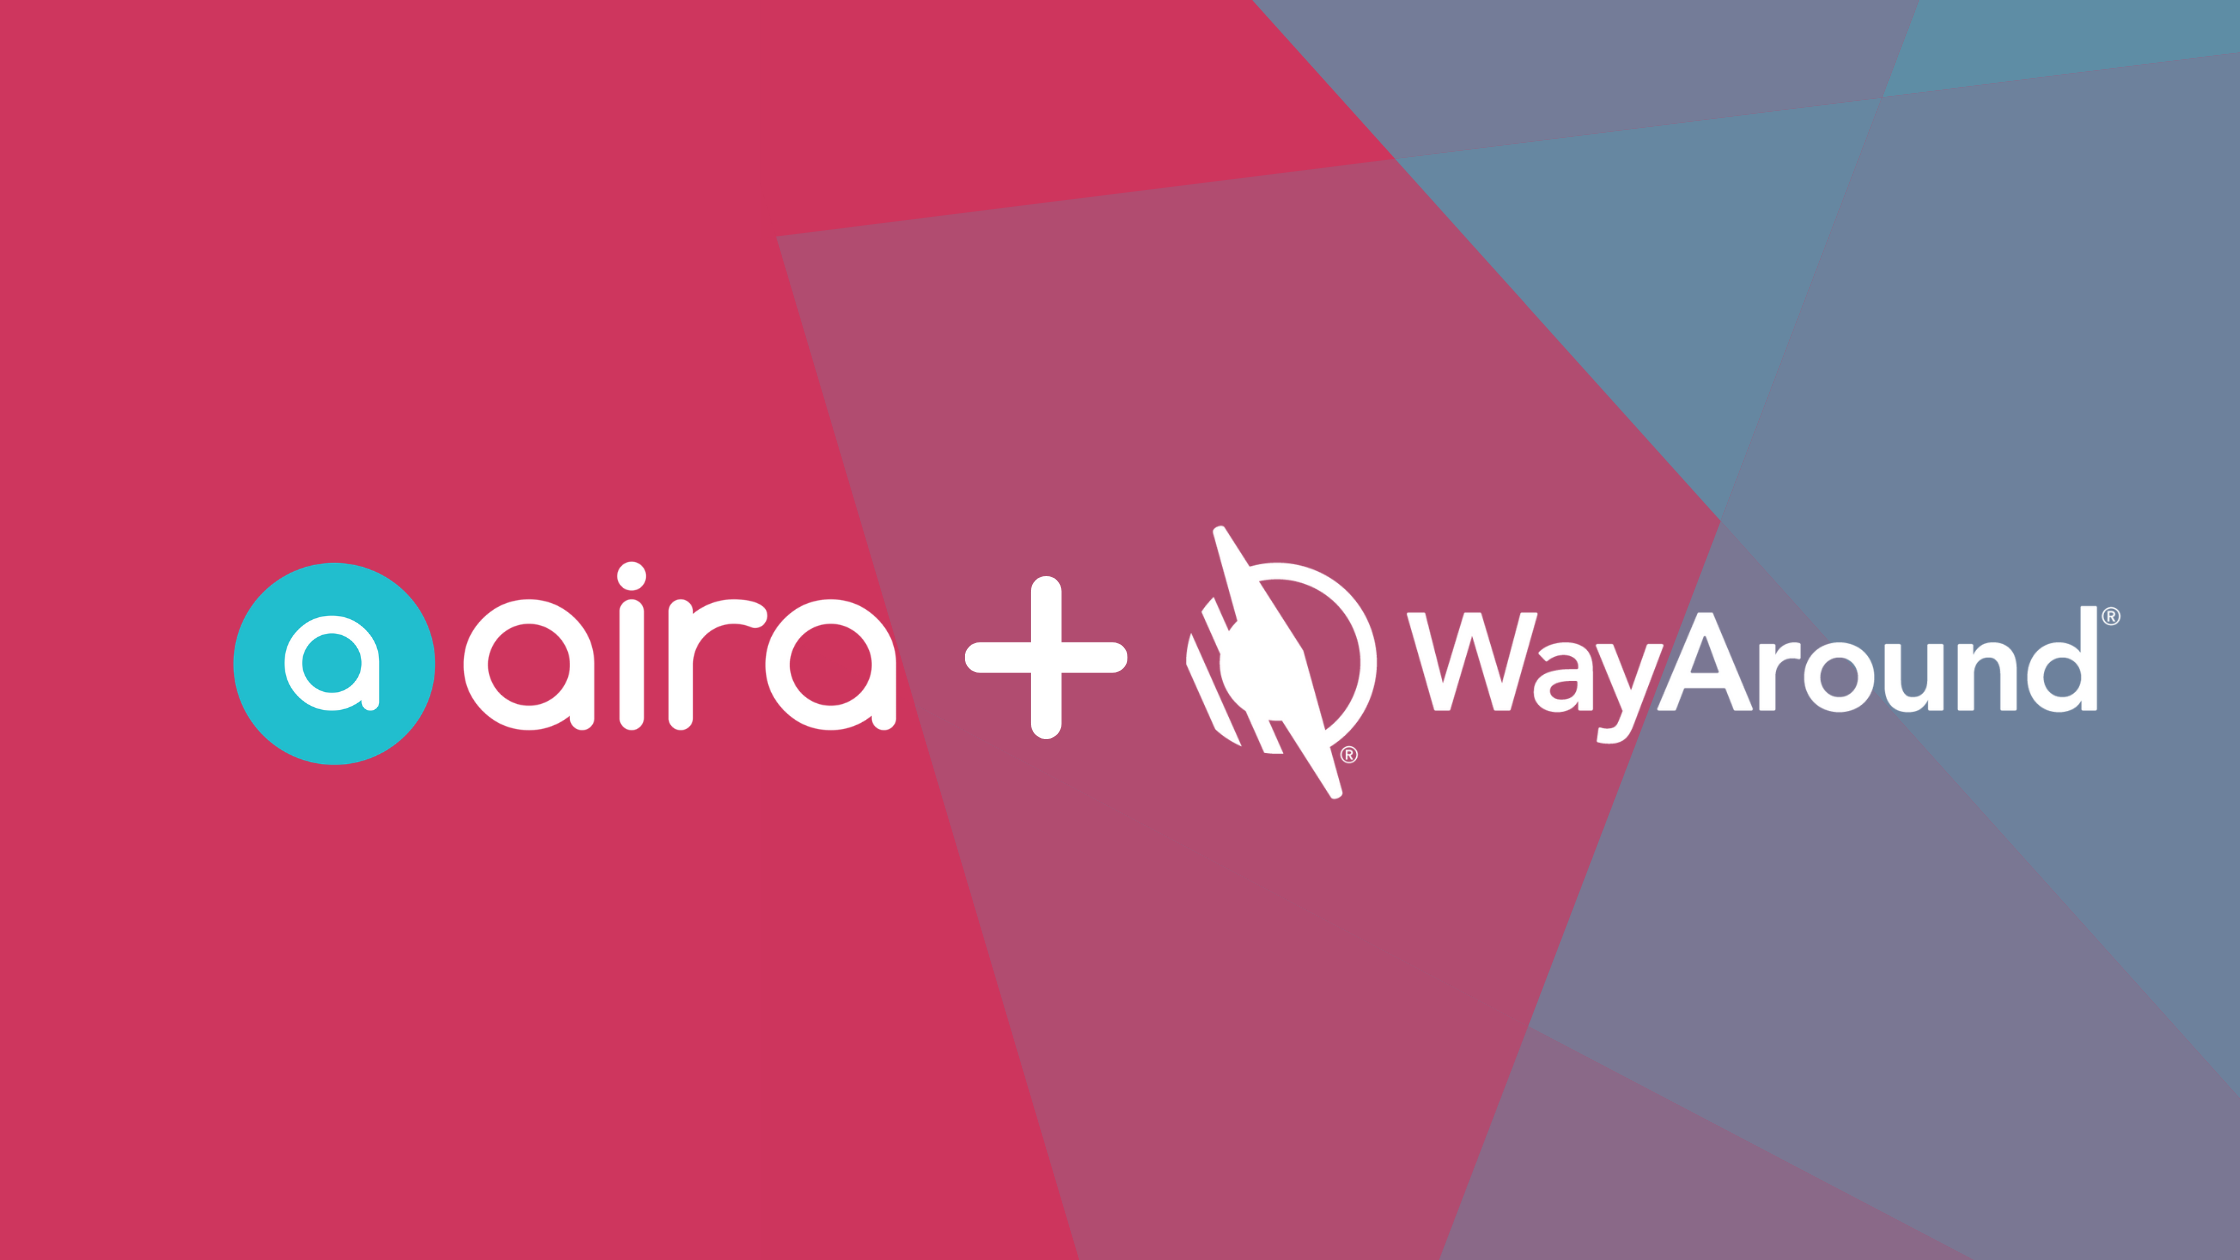 Banner image with red and blue background that says aira + WayAround. Image includes both companies' logos.